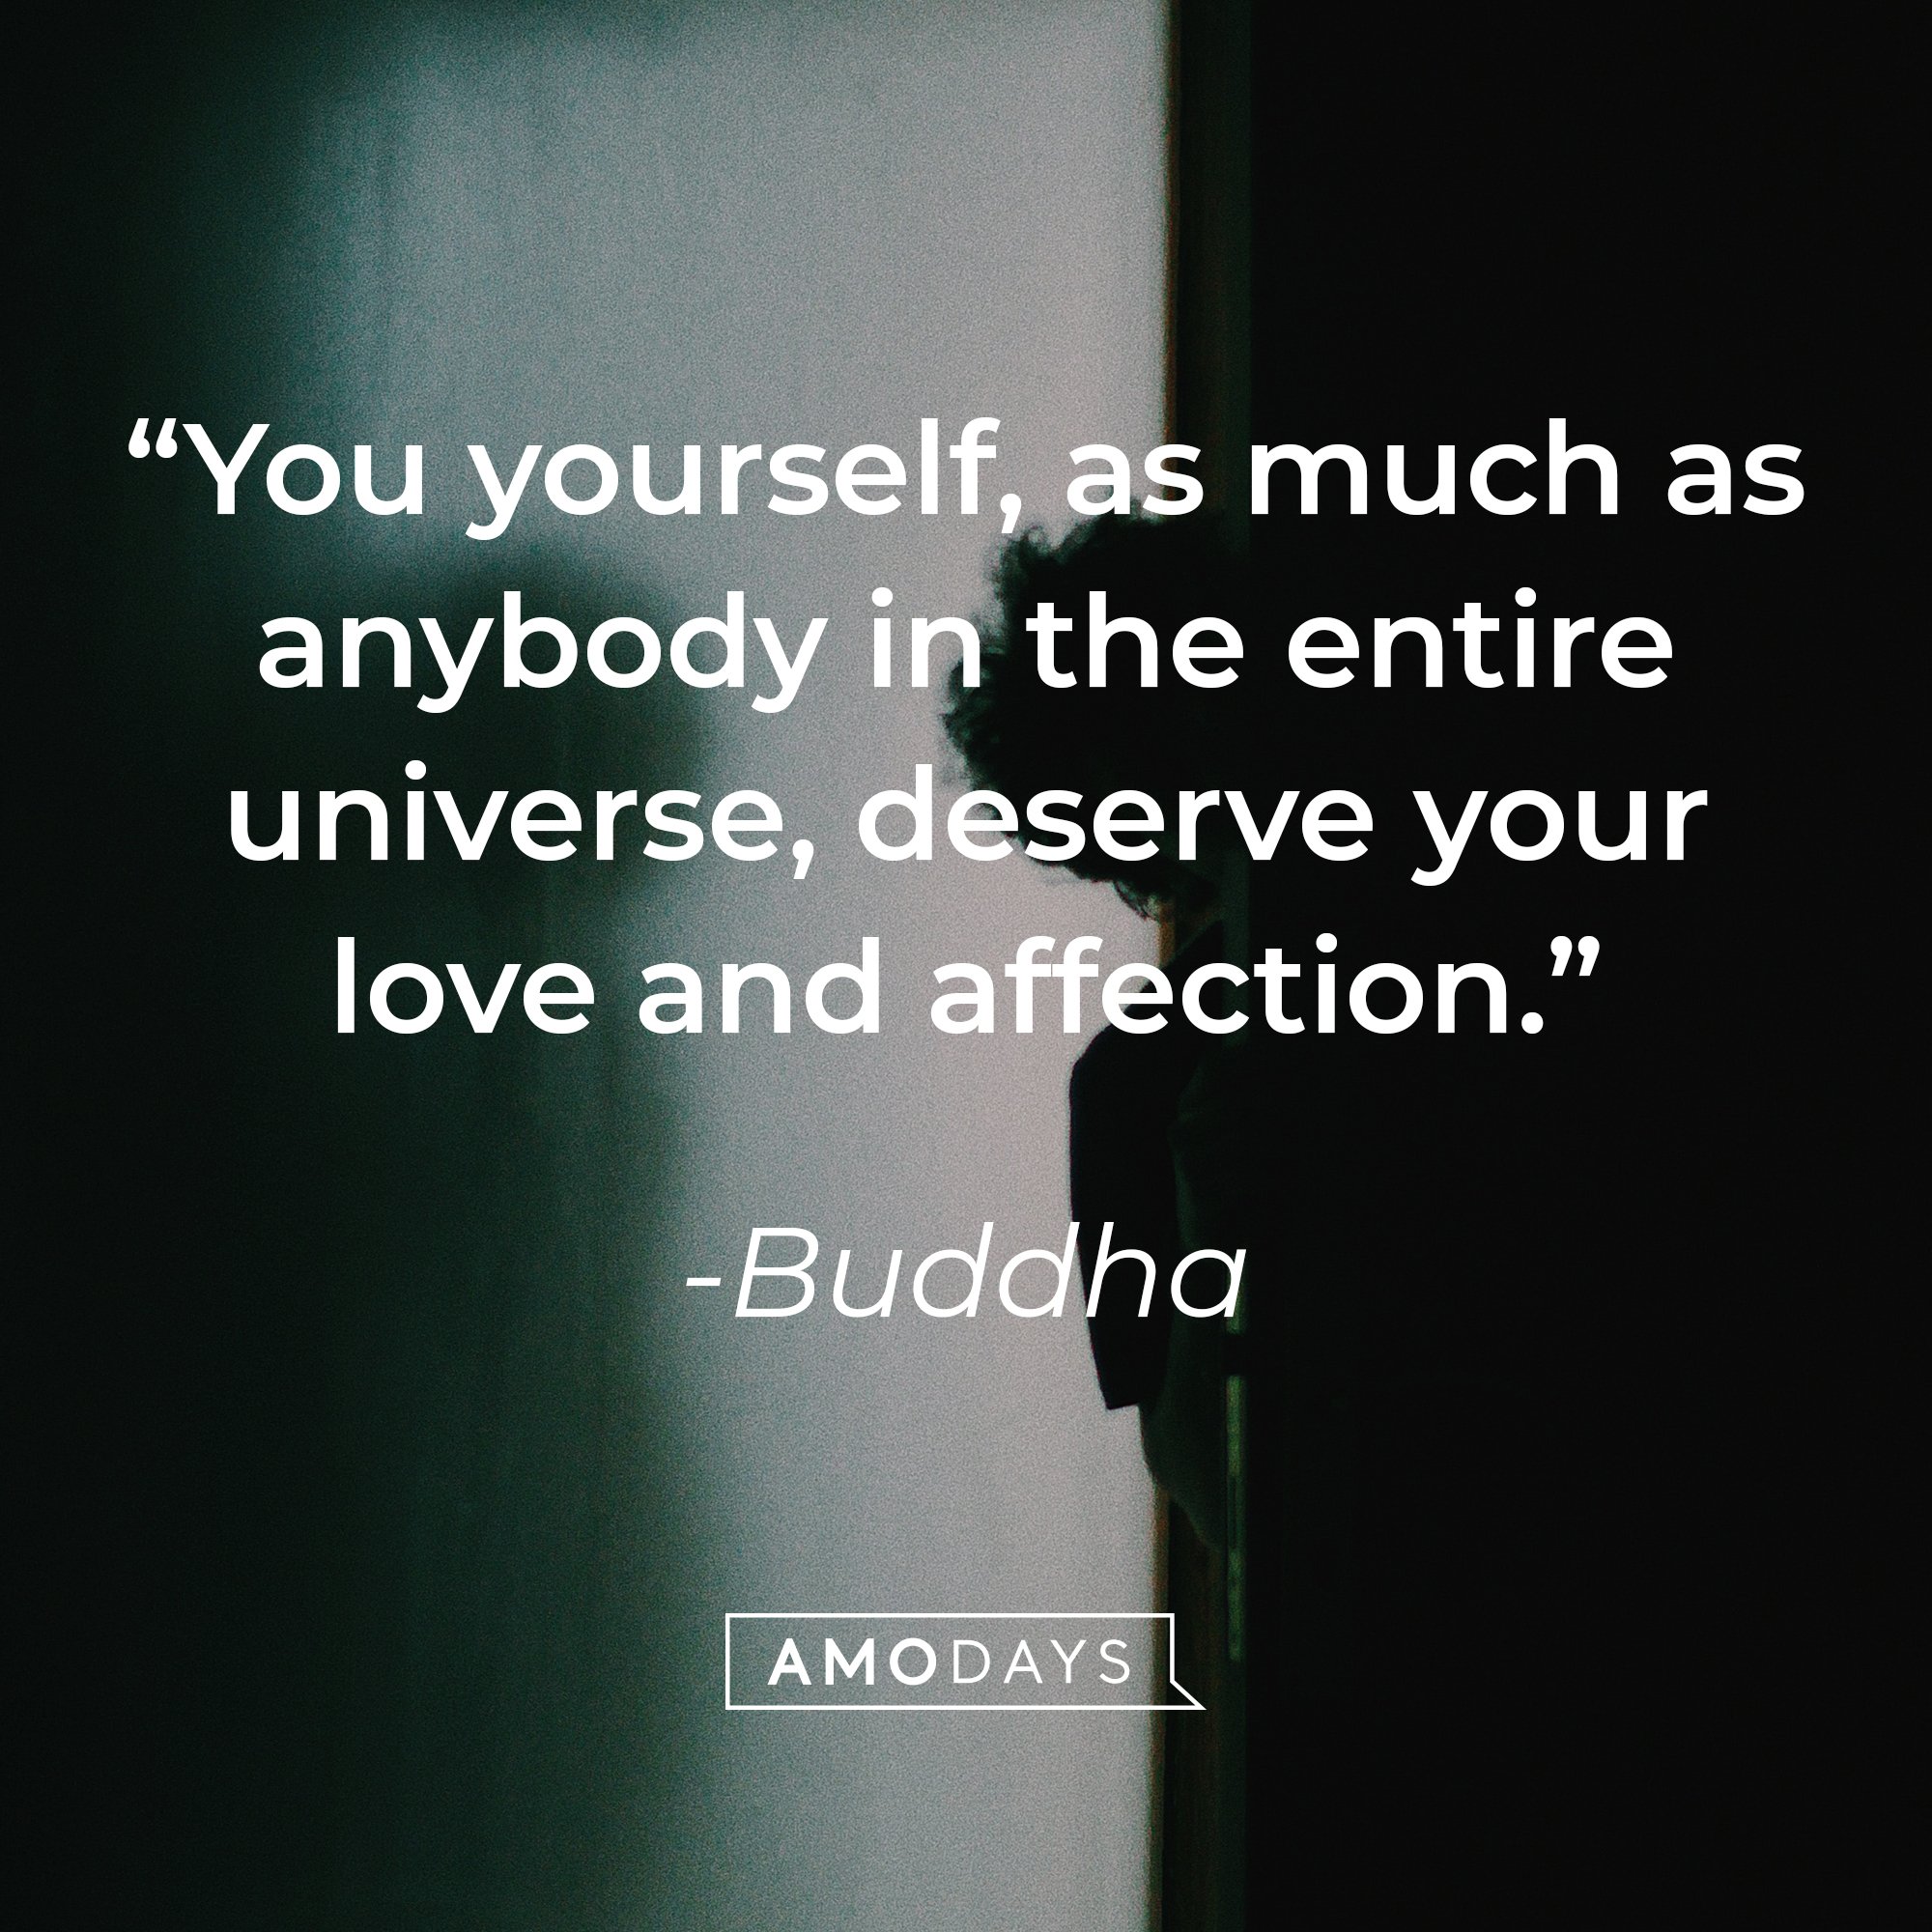 Buddha's quote: “You yourself, as much as anybody in the entire universe, deserve your love and affection.” | Images: AmoDays